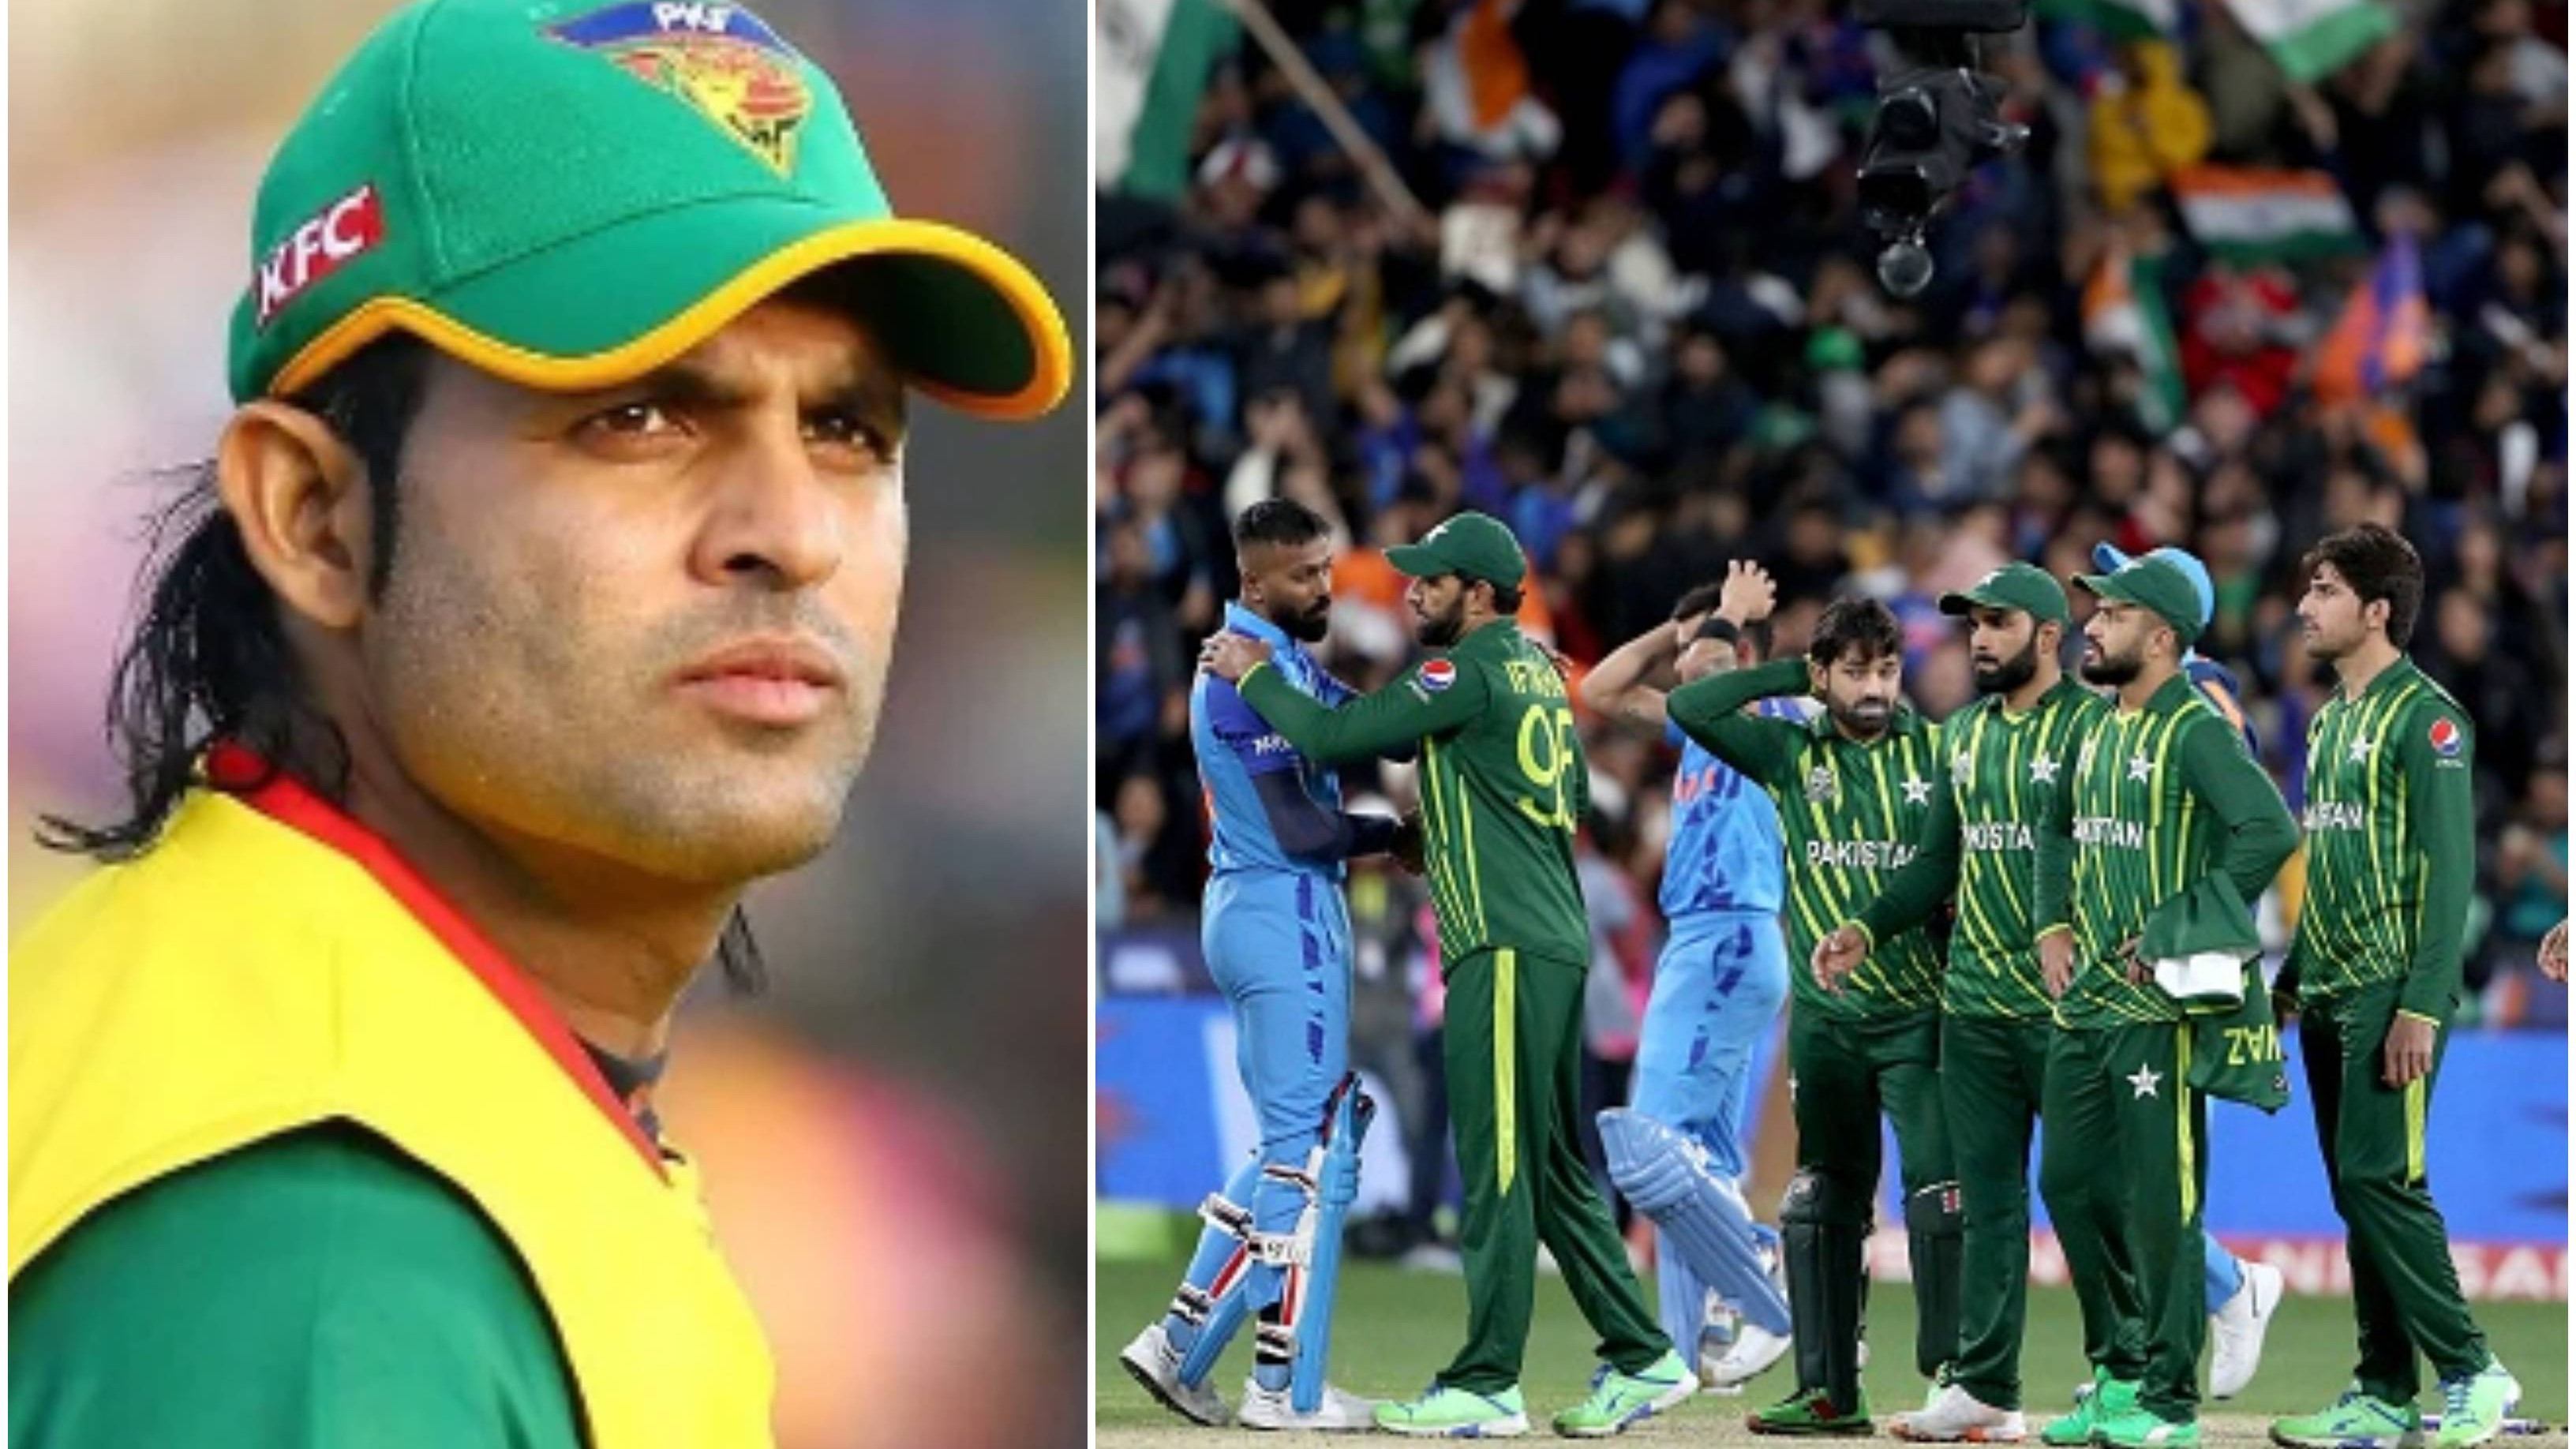 “Indian Musalman hume badi support karte hain,” Rana Naved-ul-Hasan makes controversial statement ahead of World Cup